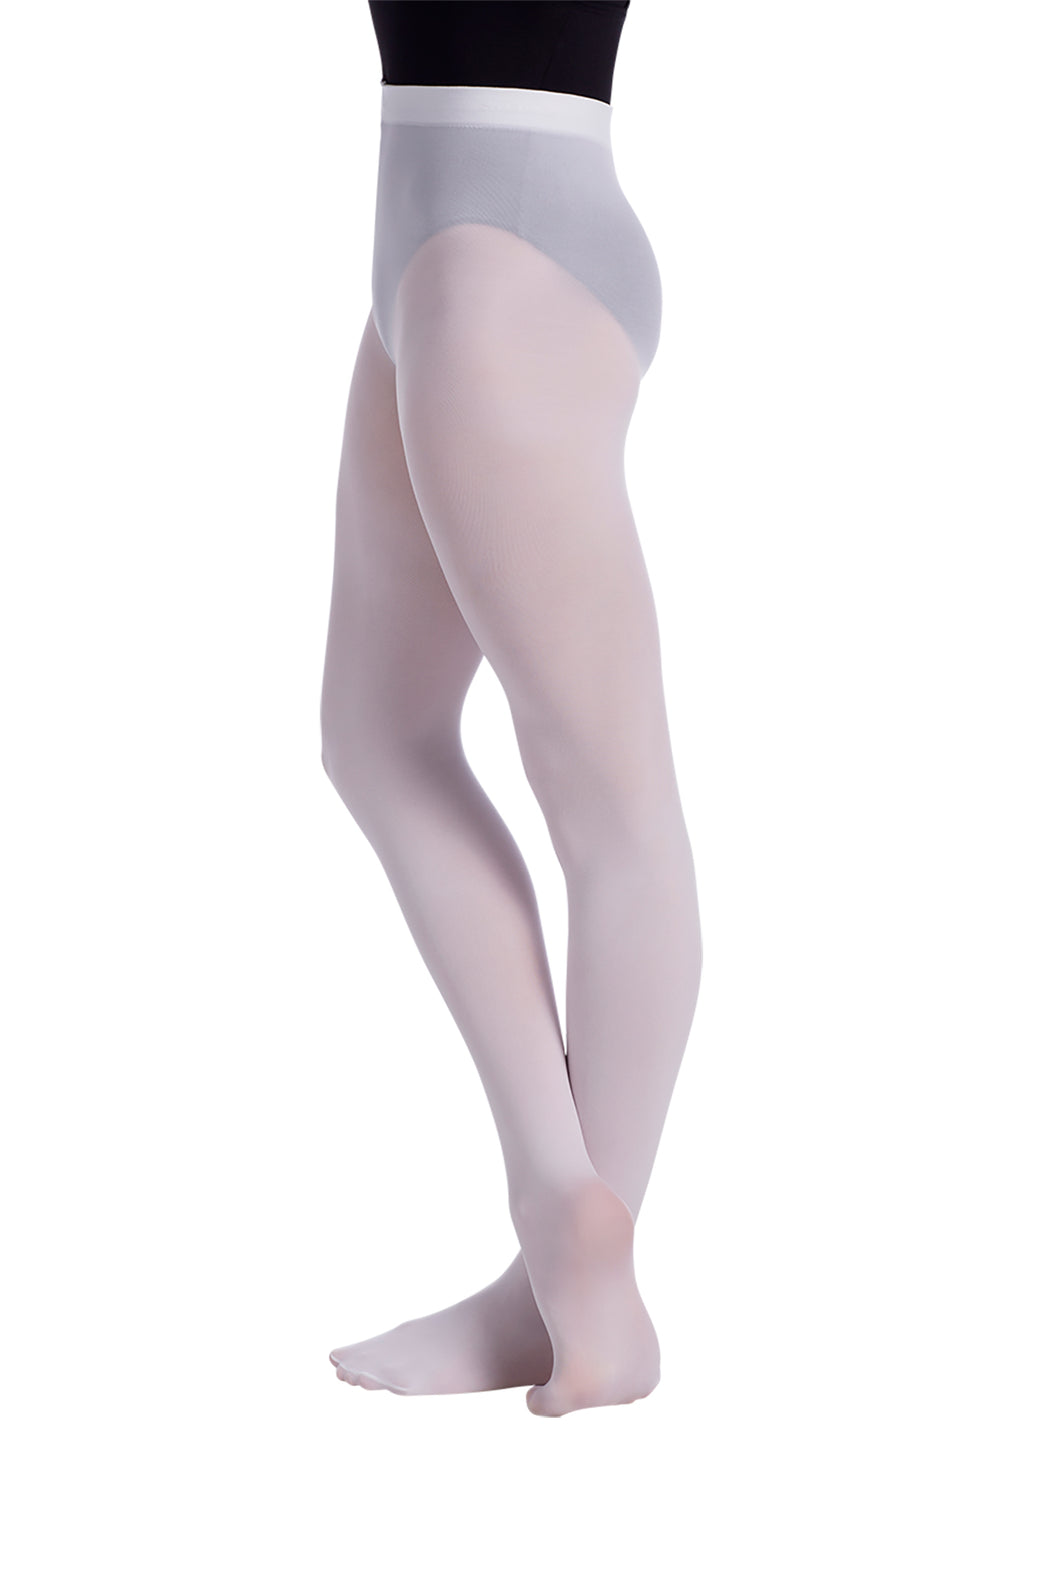 Adult Footed Tights - TS74